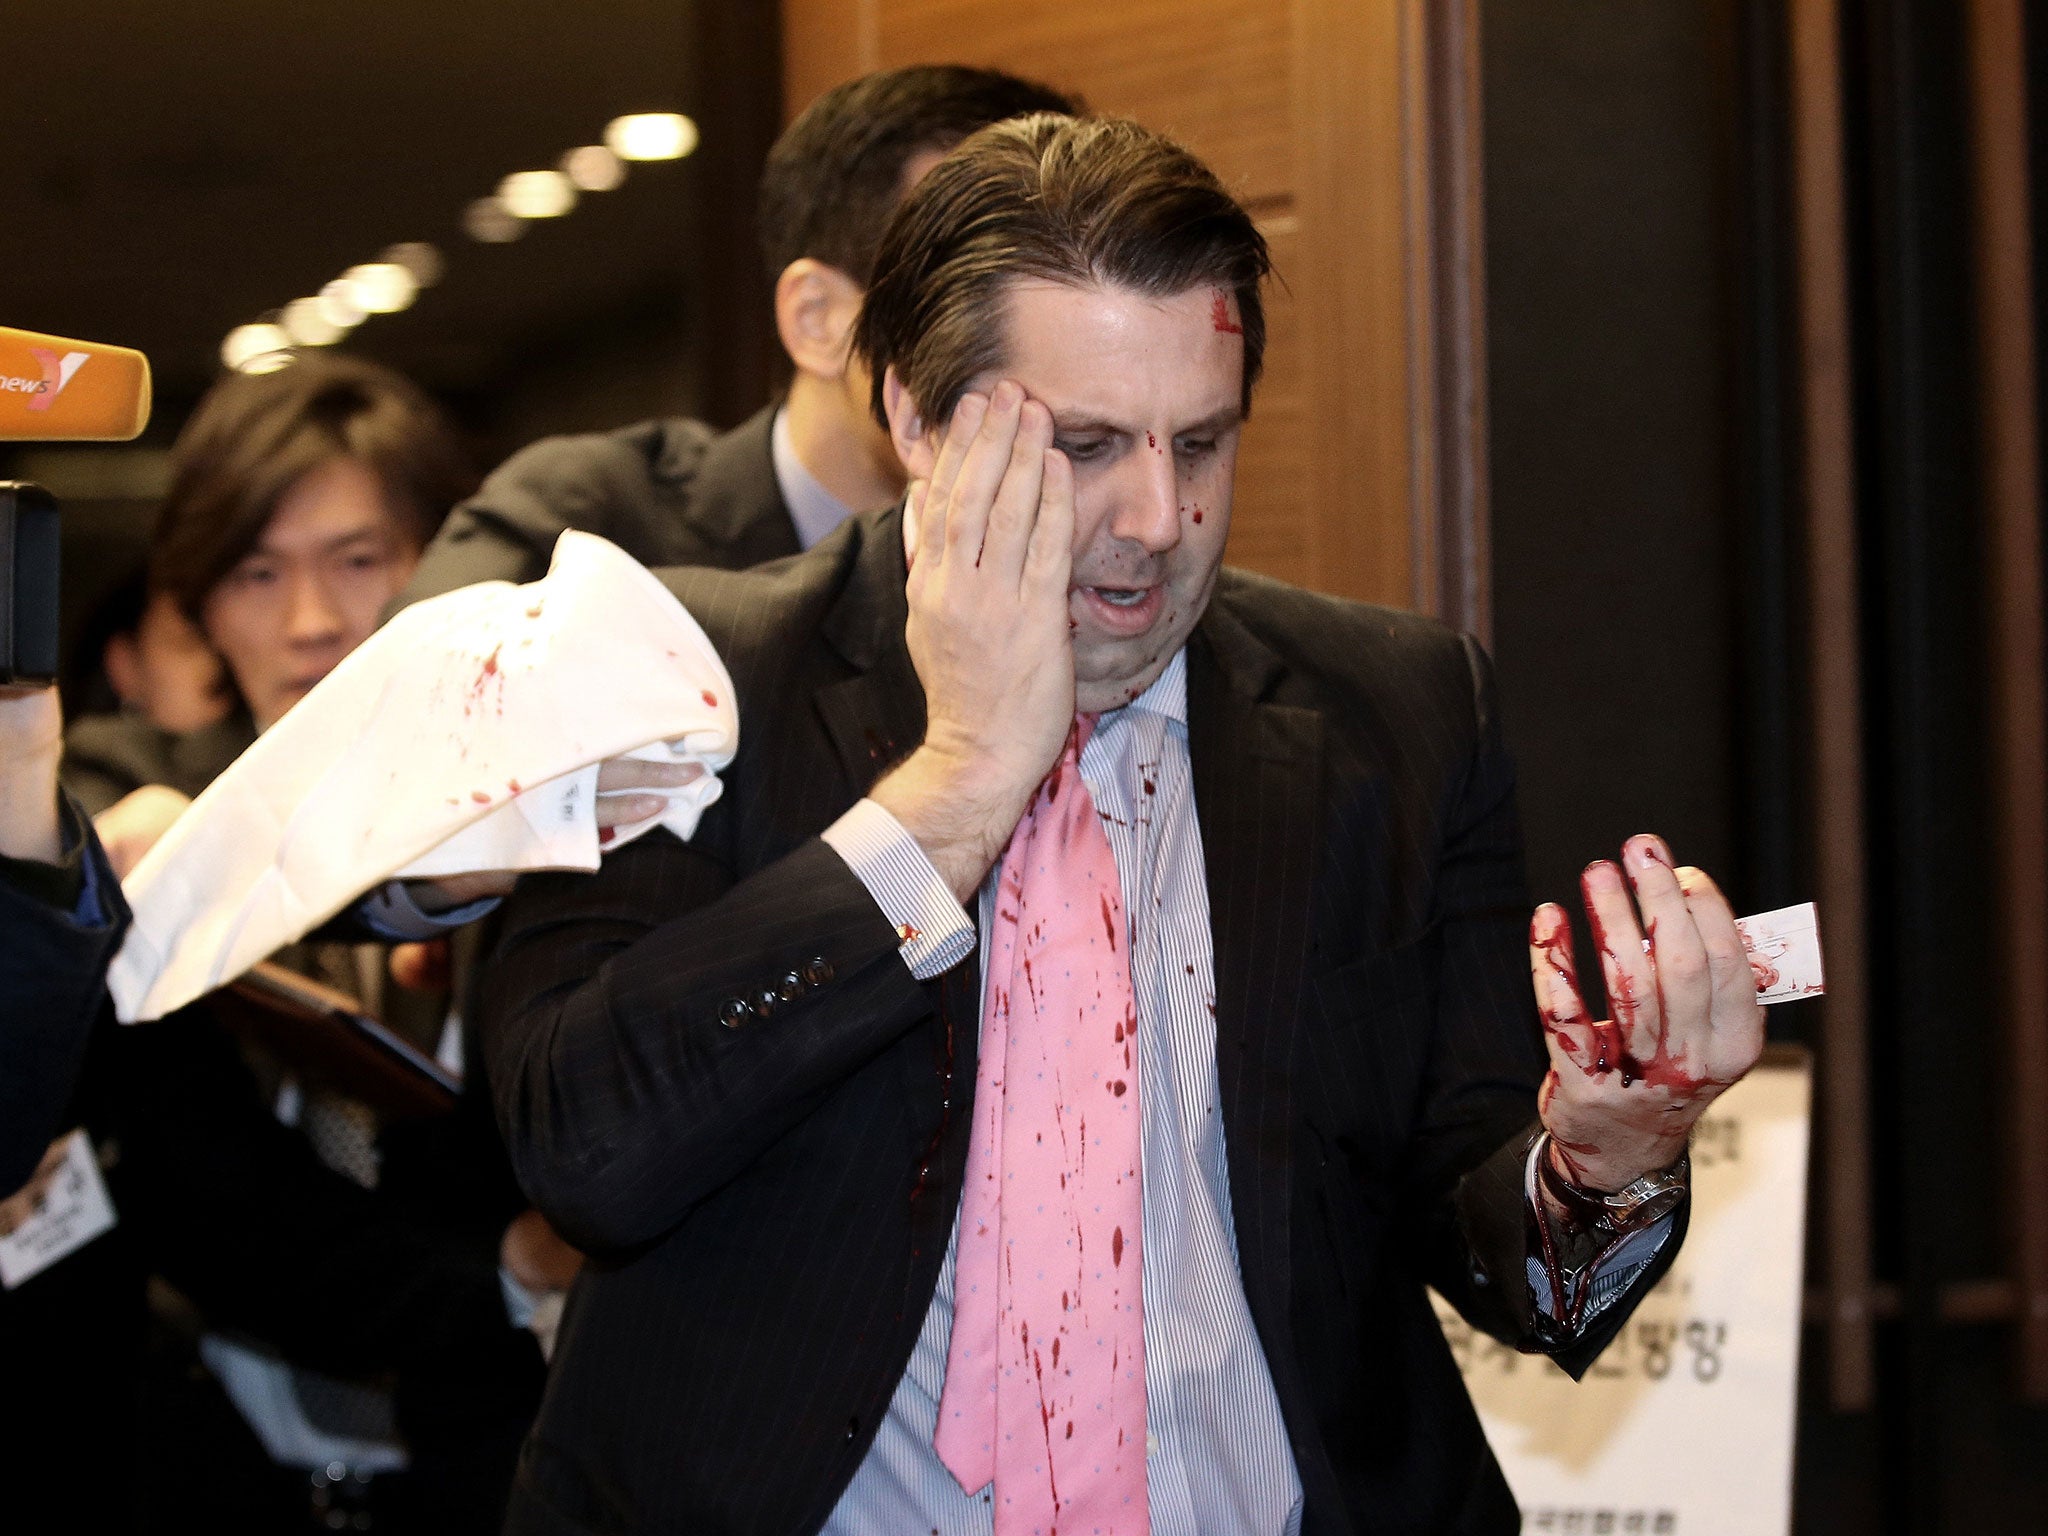 U.S. Ambassador to South Korea Mark Lippert leaves a lecture hall for hospital in Seoul, South Korea, Thursday, March 5, 2015 after being attacked